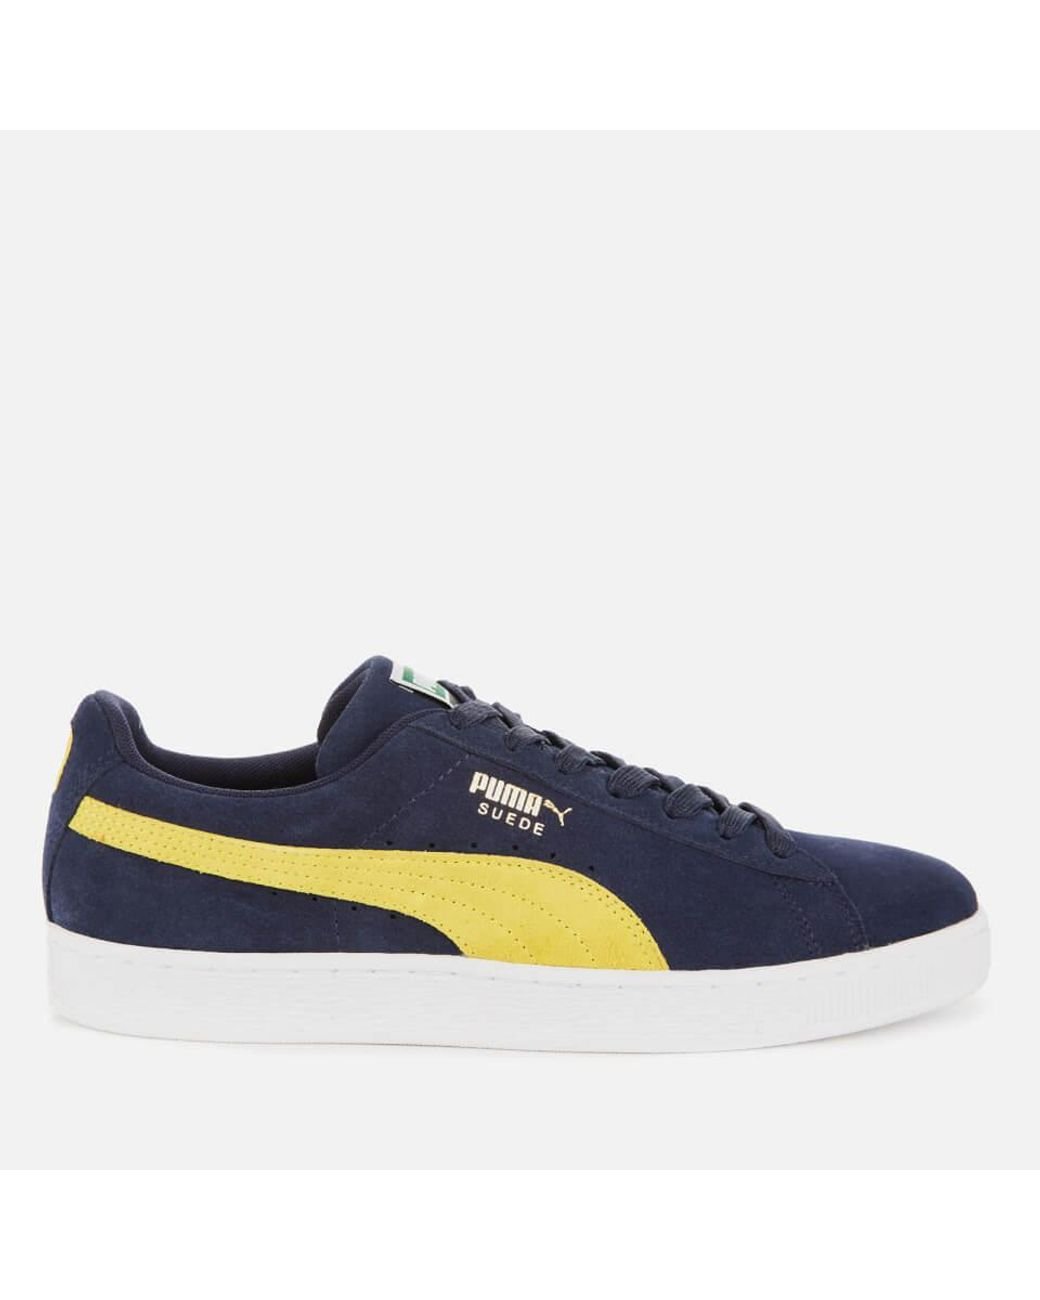 PUMA Suede Classic Trainers in Navy/Yellow (Blue) for Men | Lyst